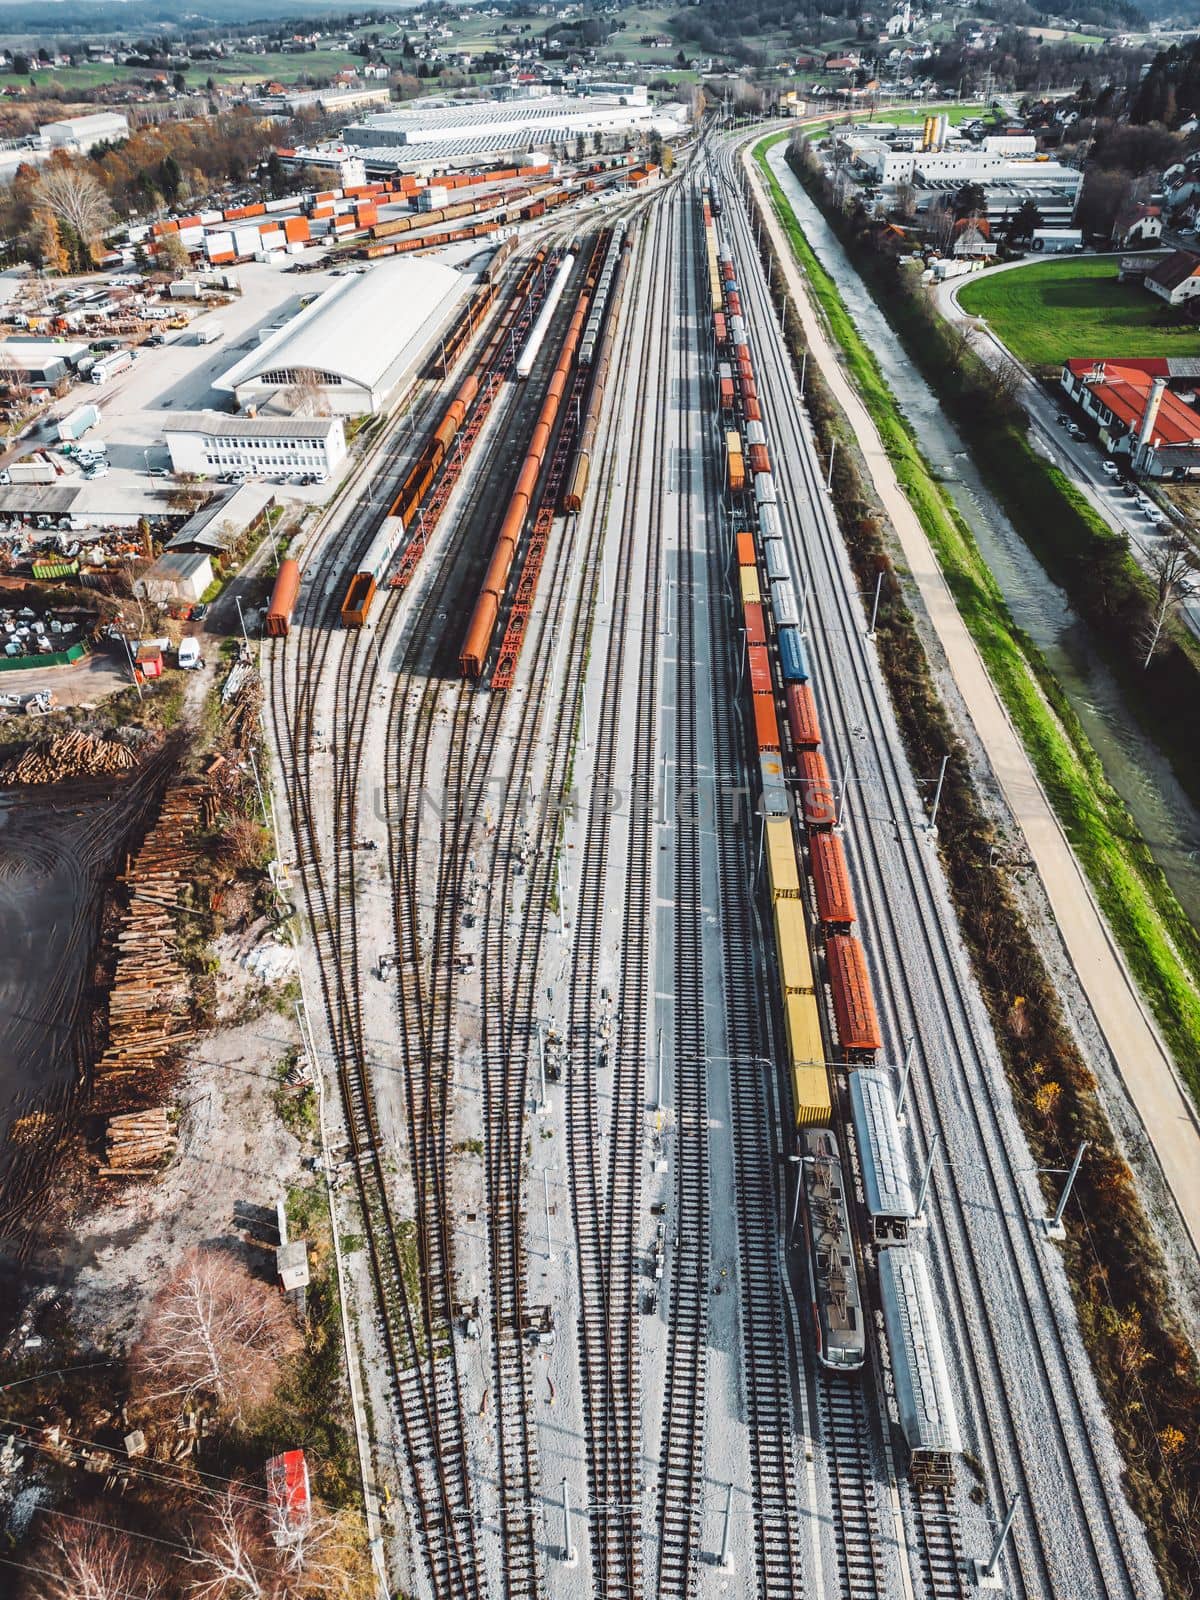 Cargo trains close-up. Aerial view of colorful freight trains on the railway station. Wagons with goods on railroad. Heavy industry. Industrial conceptual scene with trains. Top view from flying drone. High quality photo